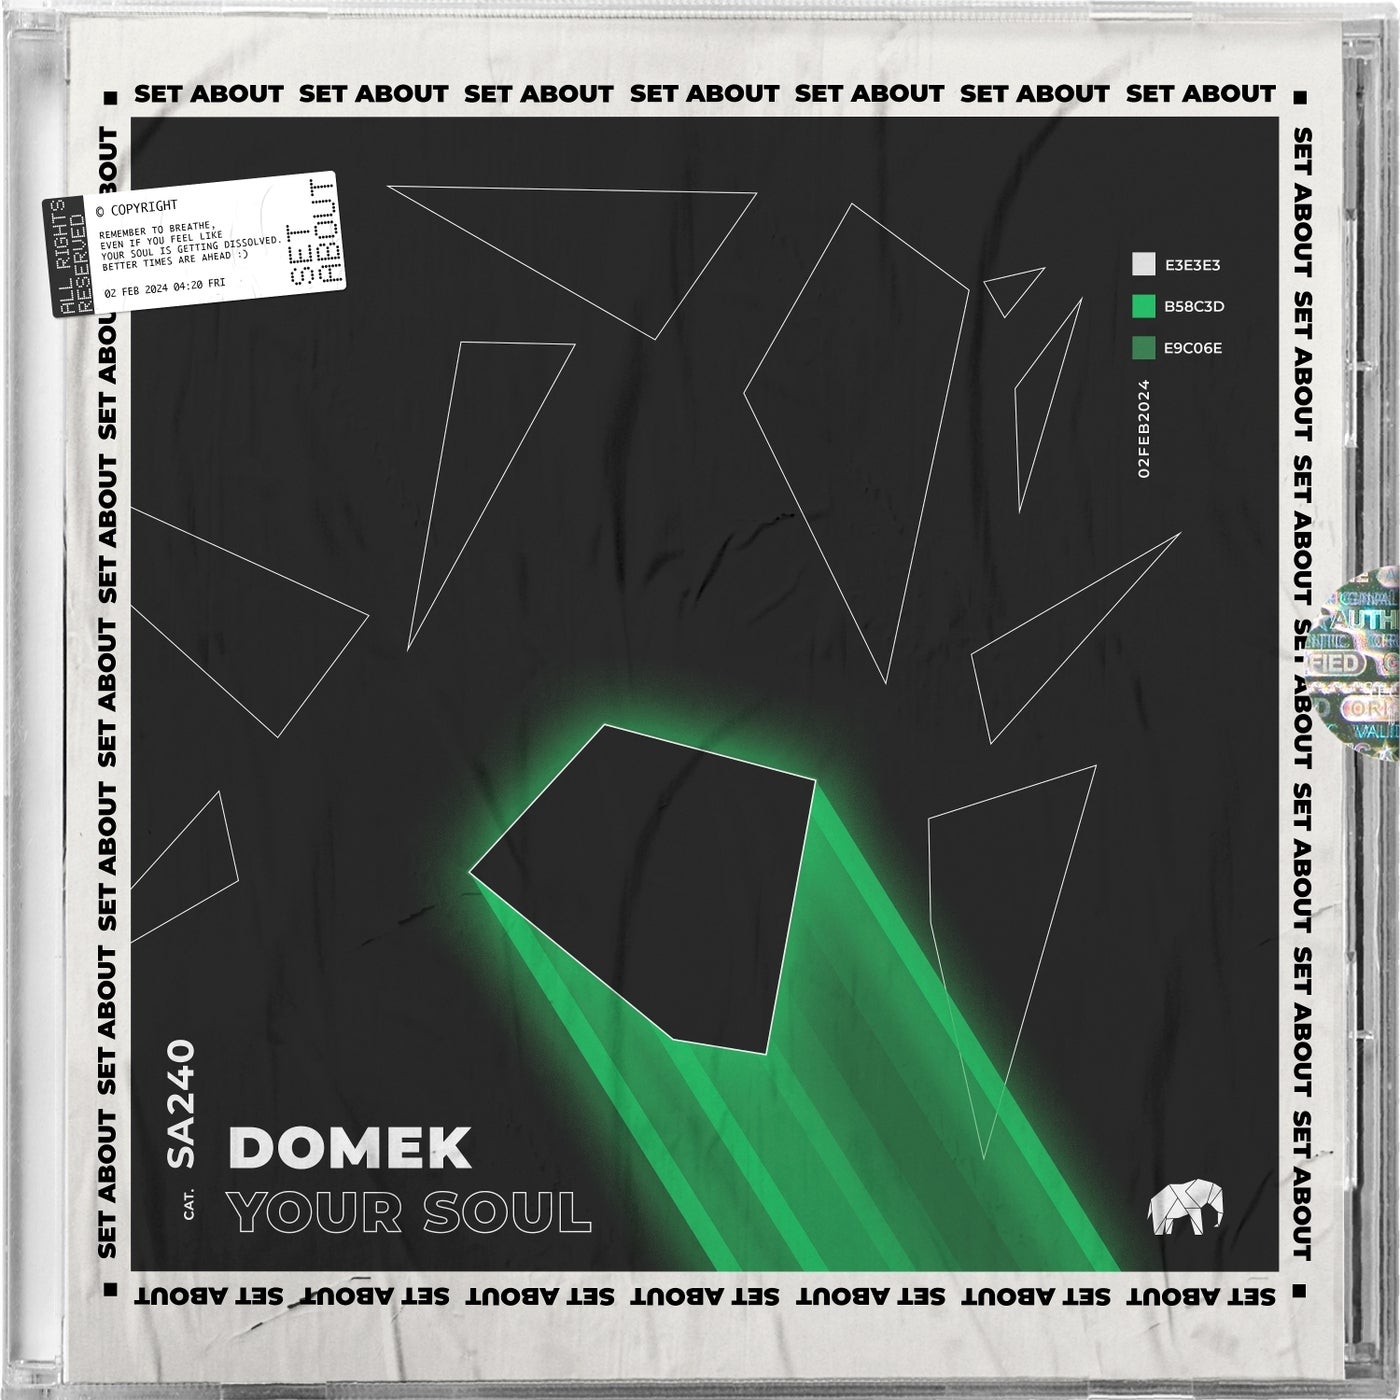 image cover: Domek - Your Soul on Set About